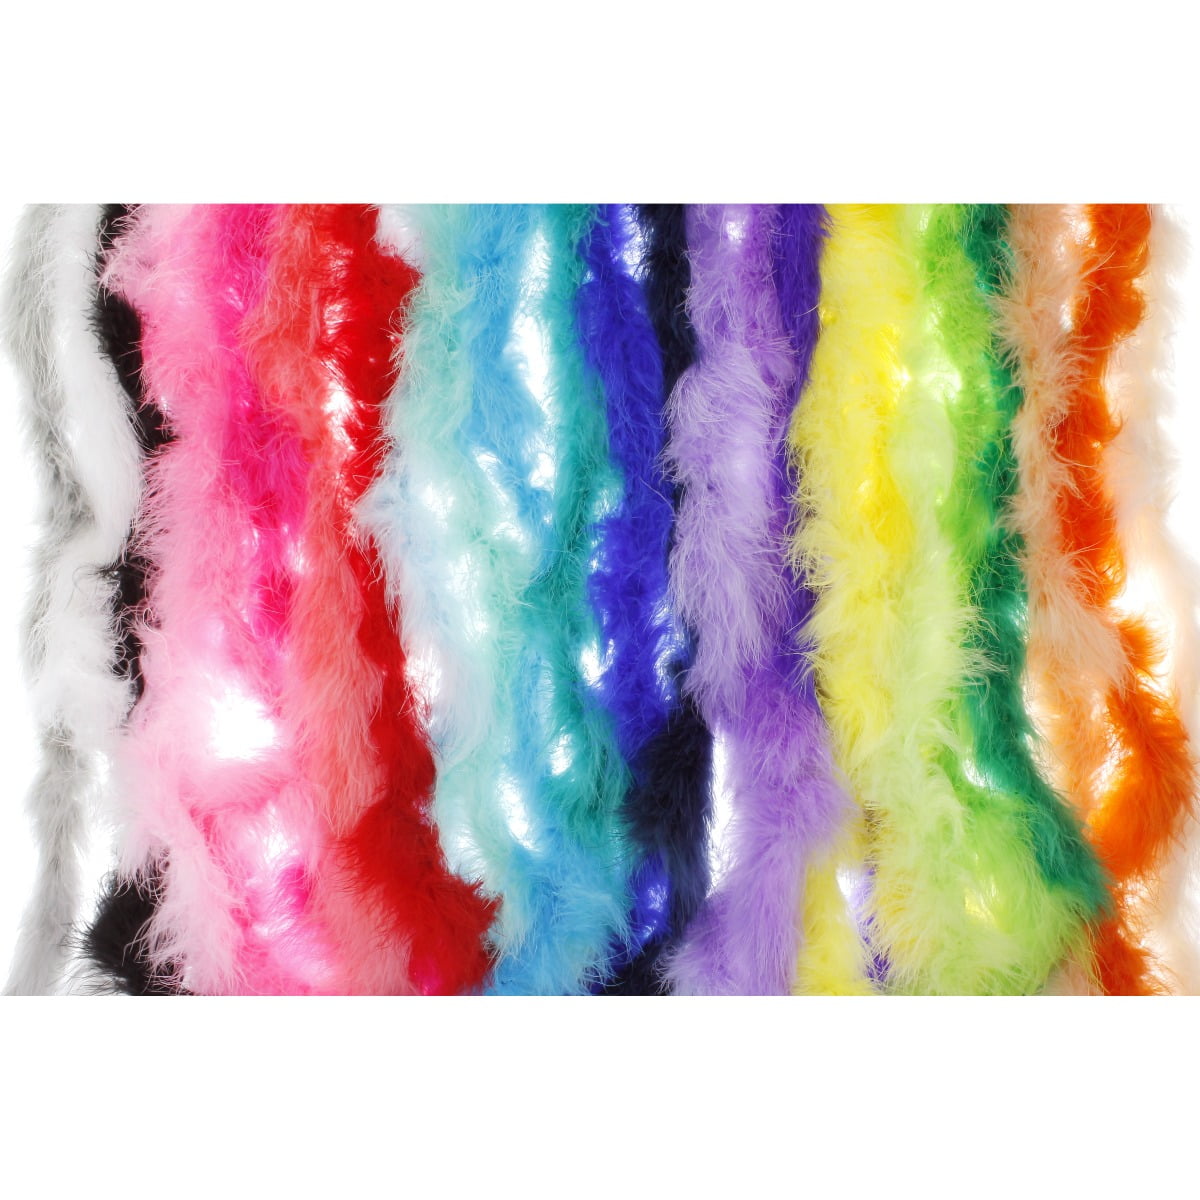 Larryhot Light Pink Feather Boa - 45g 2 Yards Boas for Party  Bulk,Christmas,Wedding Centerpieces,Concert,Costume,Pet and Home  Decoration(45g-Pink)